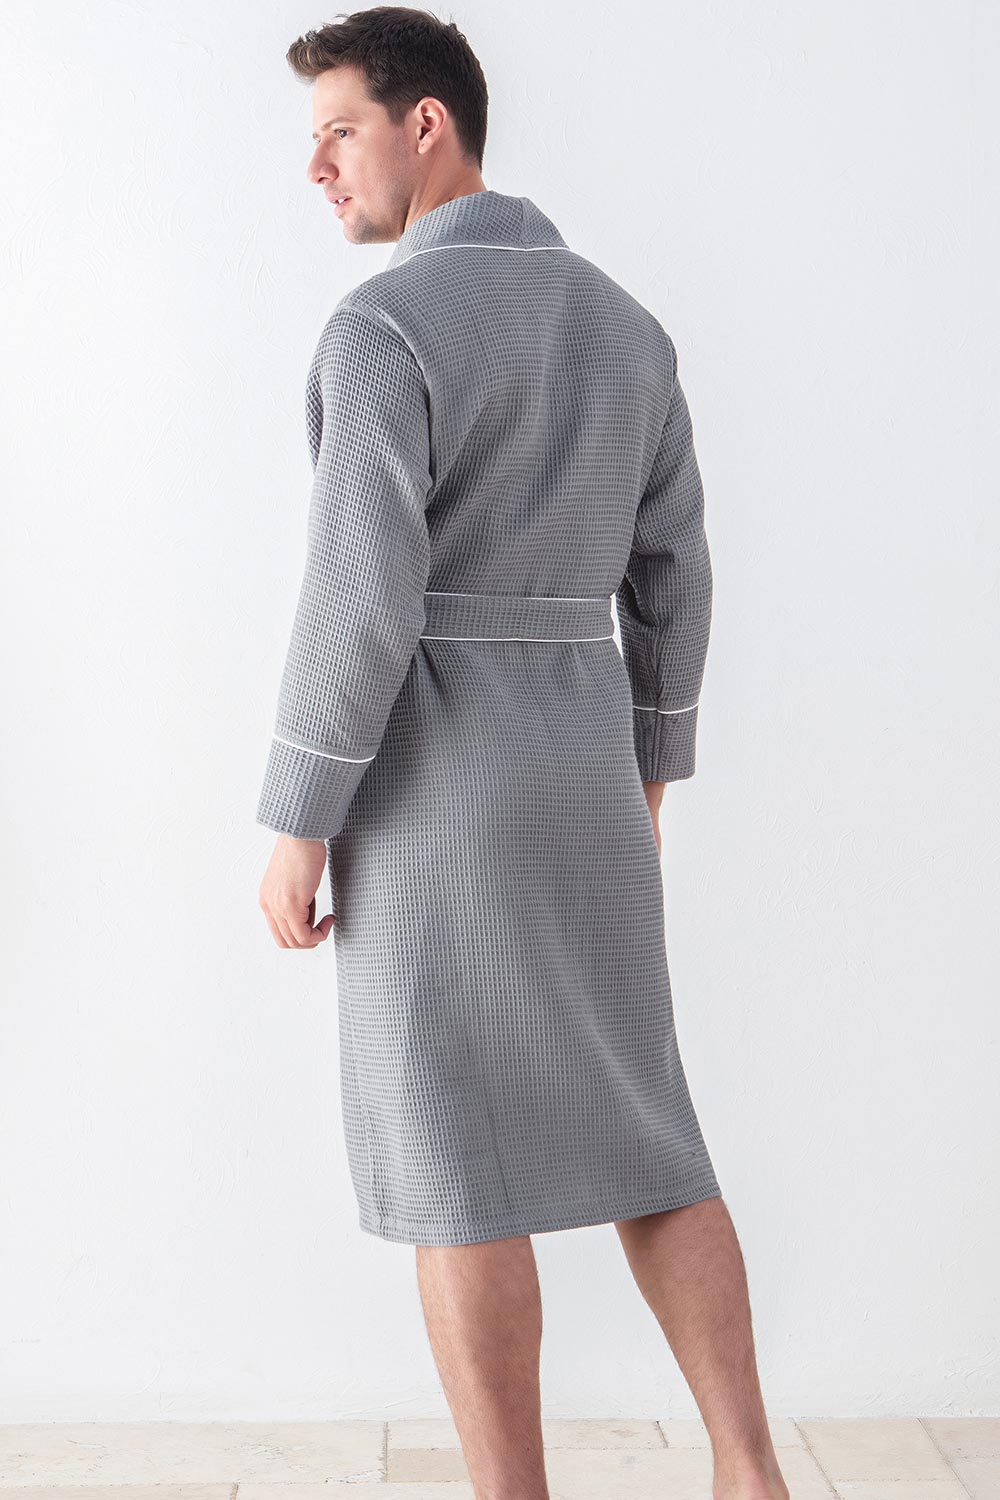 Picture of a Men's Luxury Waffle Knit Robe grey back